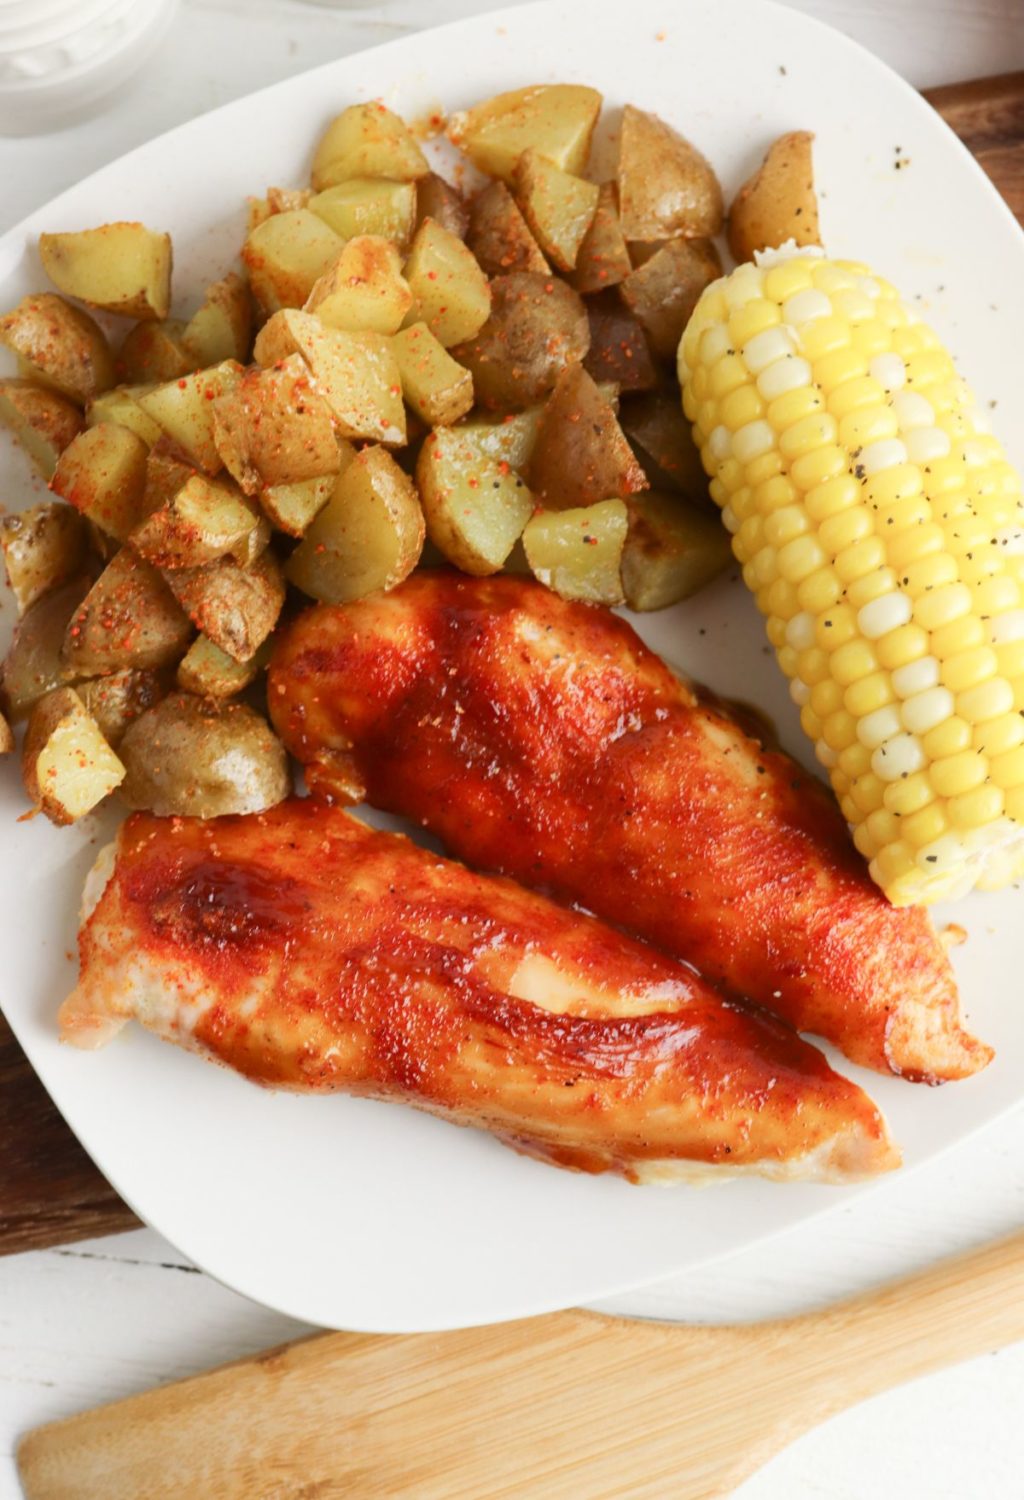 A plate with chicken, potatoes and corn.